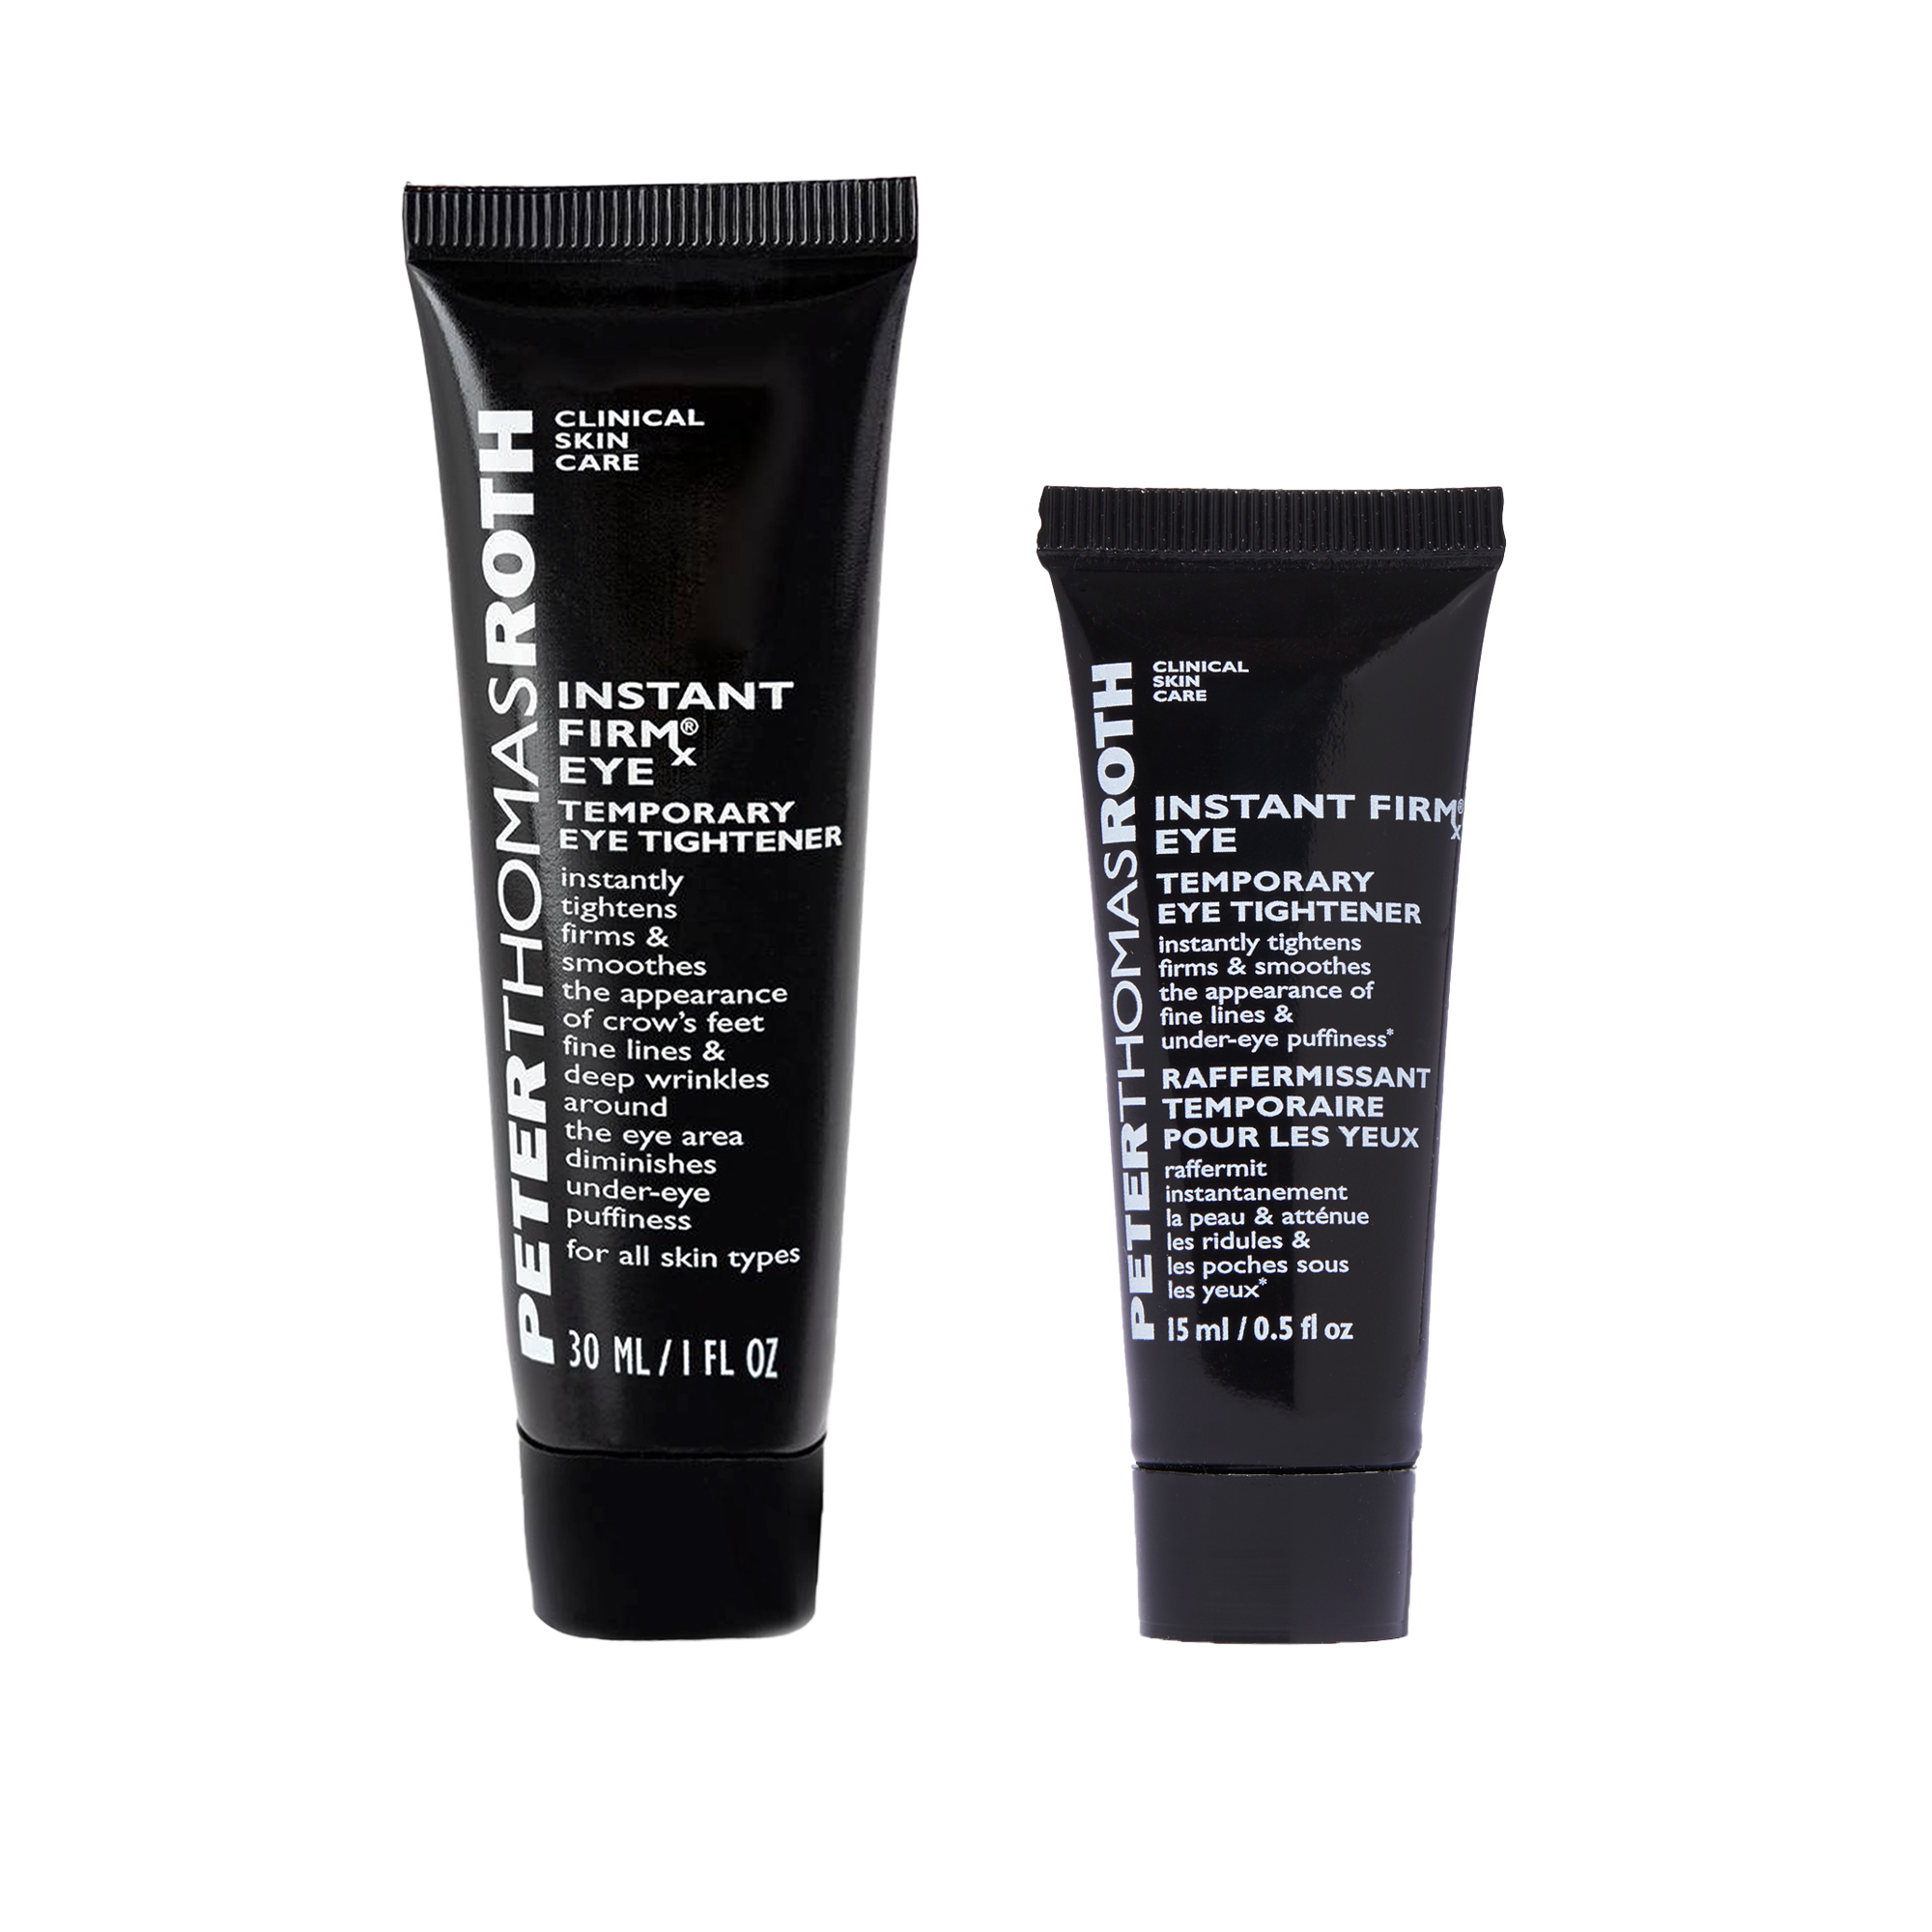 peter thomas roth home and away firmx eye duo